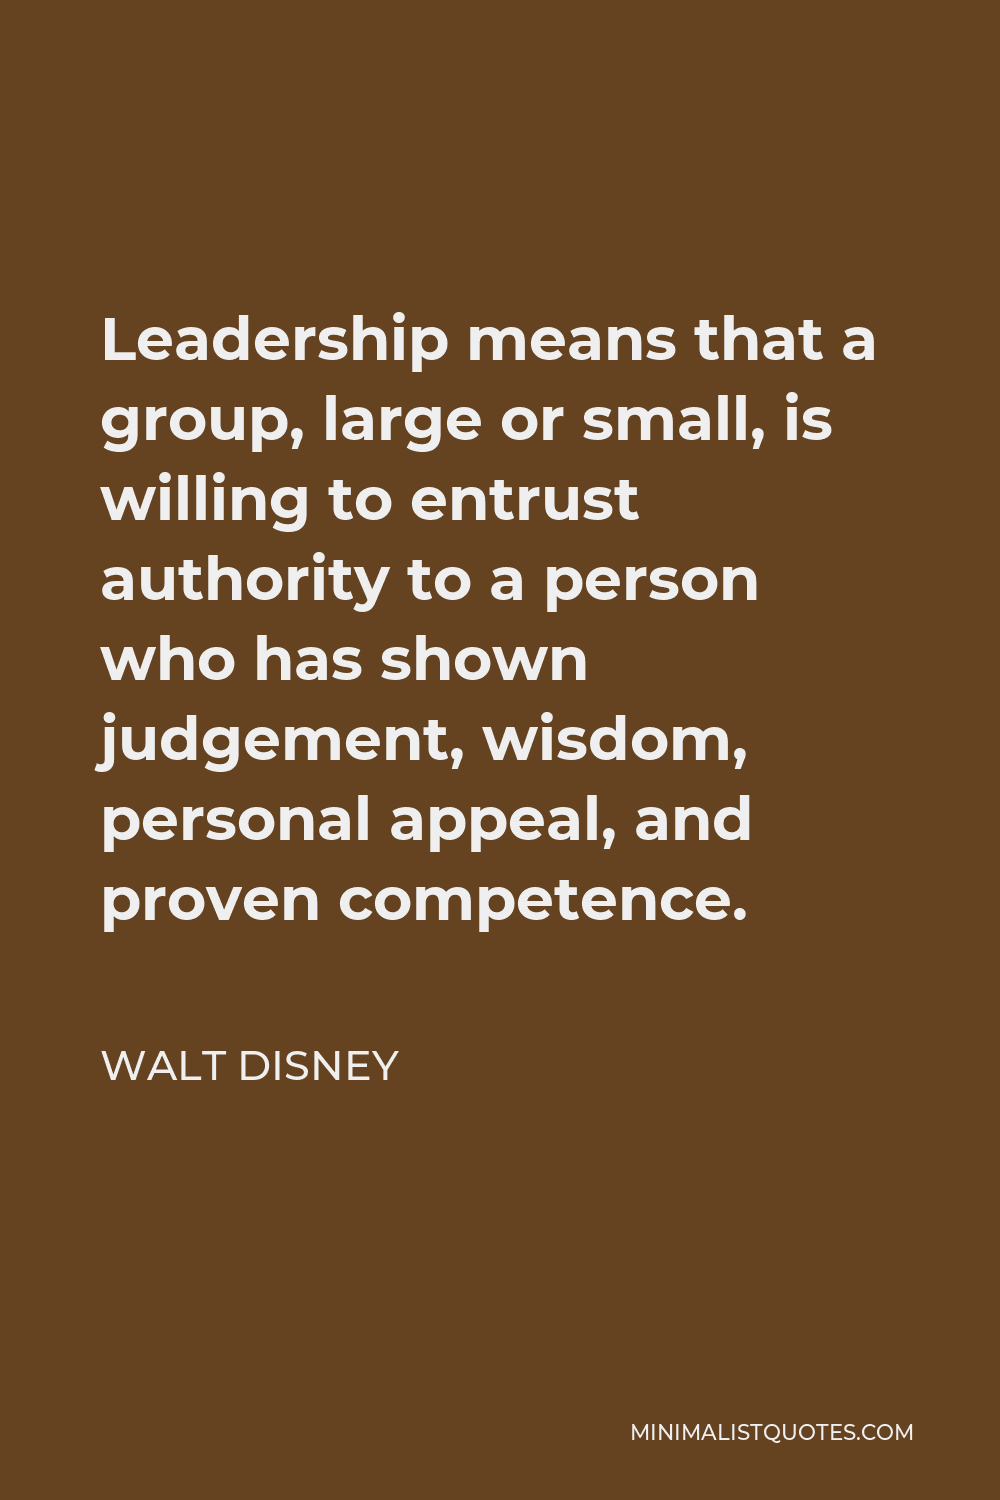 Walt Disney Quote - Leadership means that a group, large or small, is willing to entrust authority to a person who has shown judgement, wisdom, personal appeal, and proven competence.